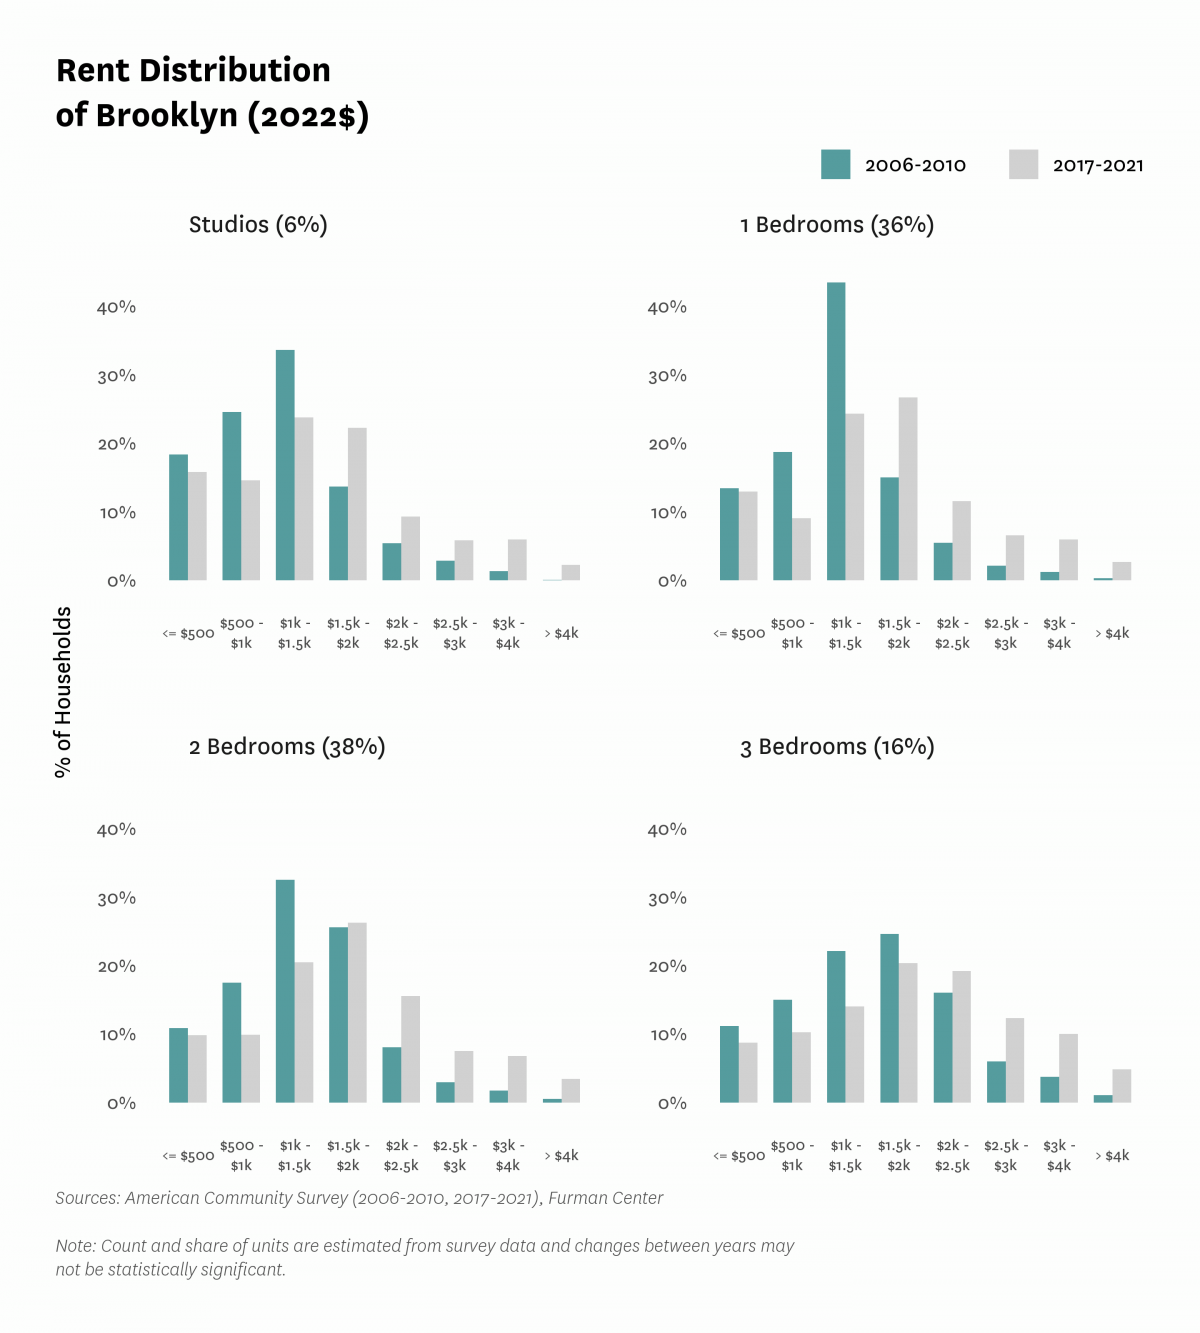 Graph showing the distribution of rents in Brooklyn in both 2010 and 2017-2021.